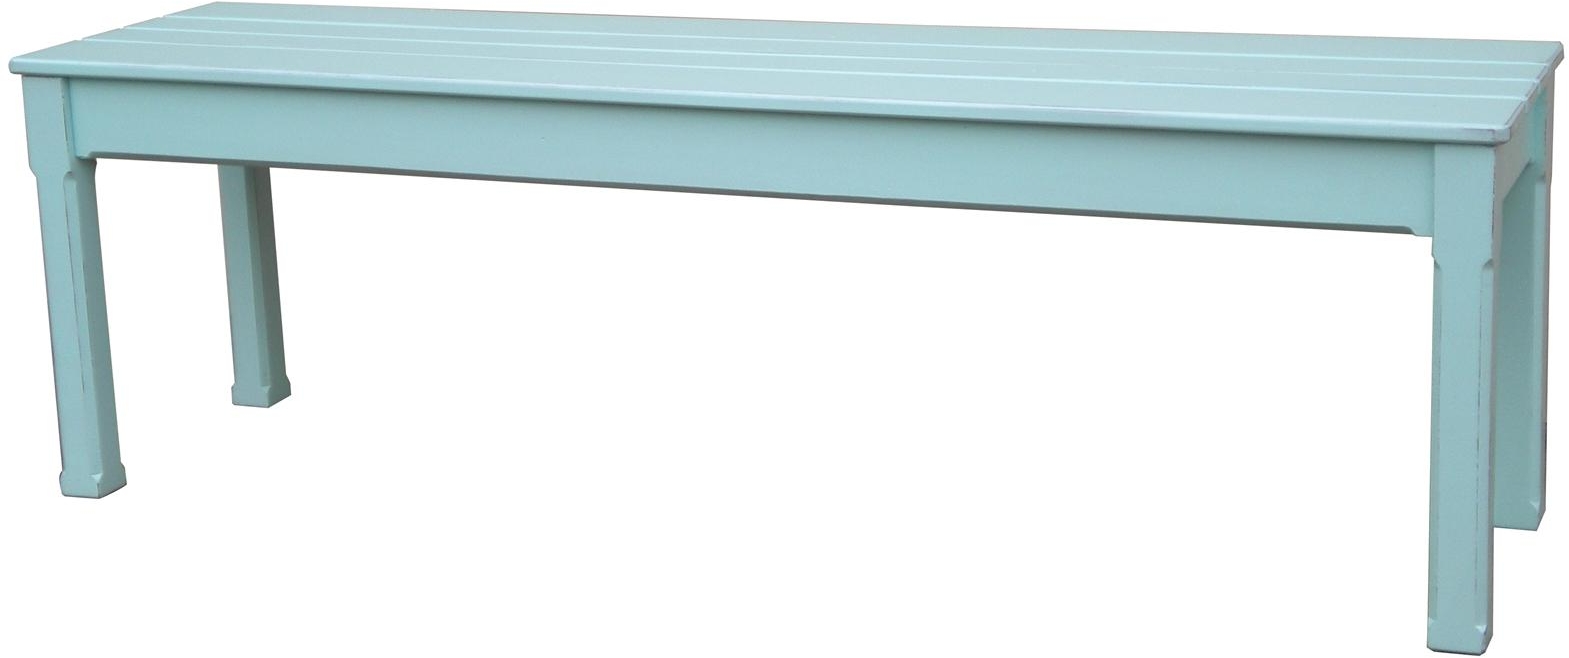 Bench TRADE WINDS COTTAGE Traditional Antique Backless Queen Painted Aqua Blue-Image 1